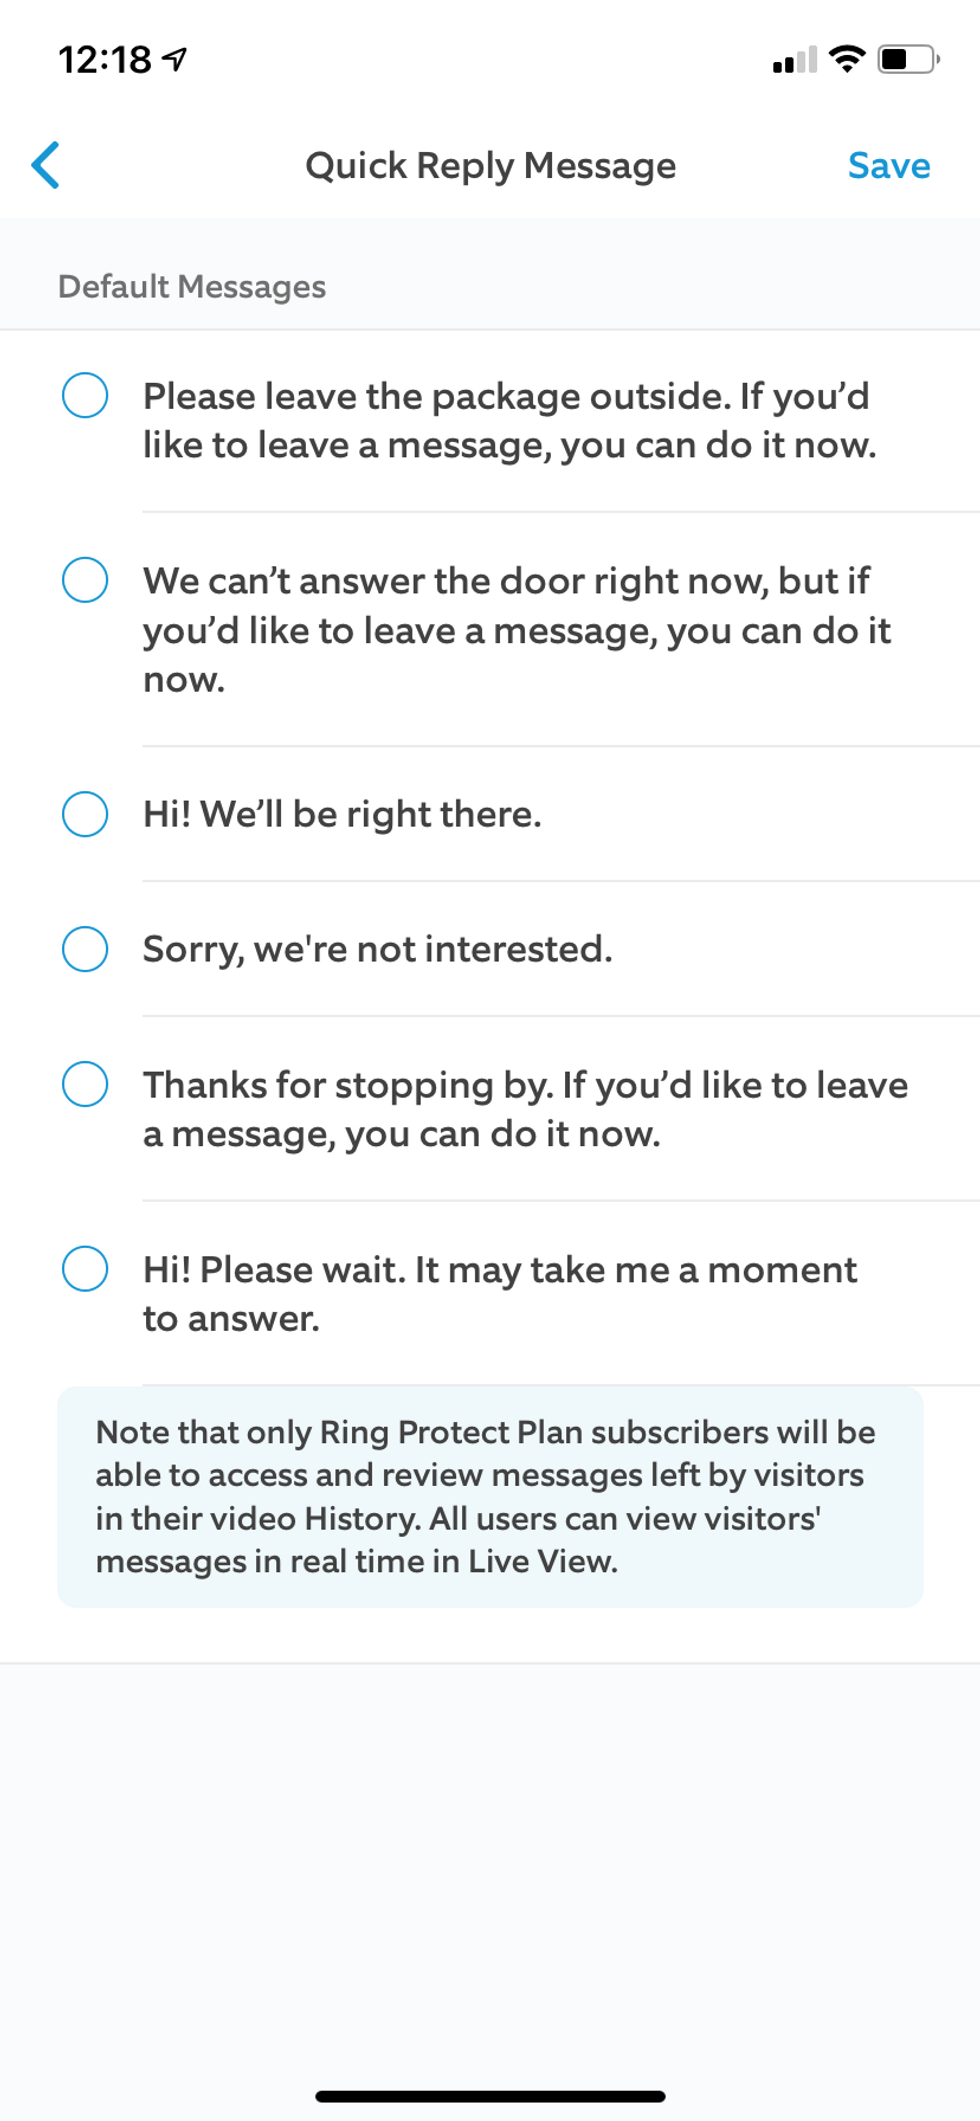 Quick Reply messages in Ring app